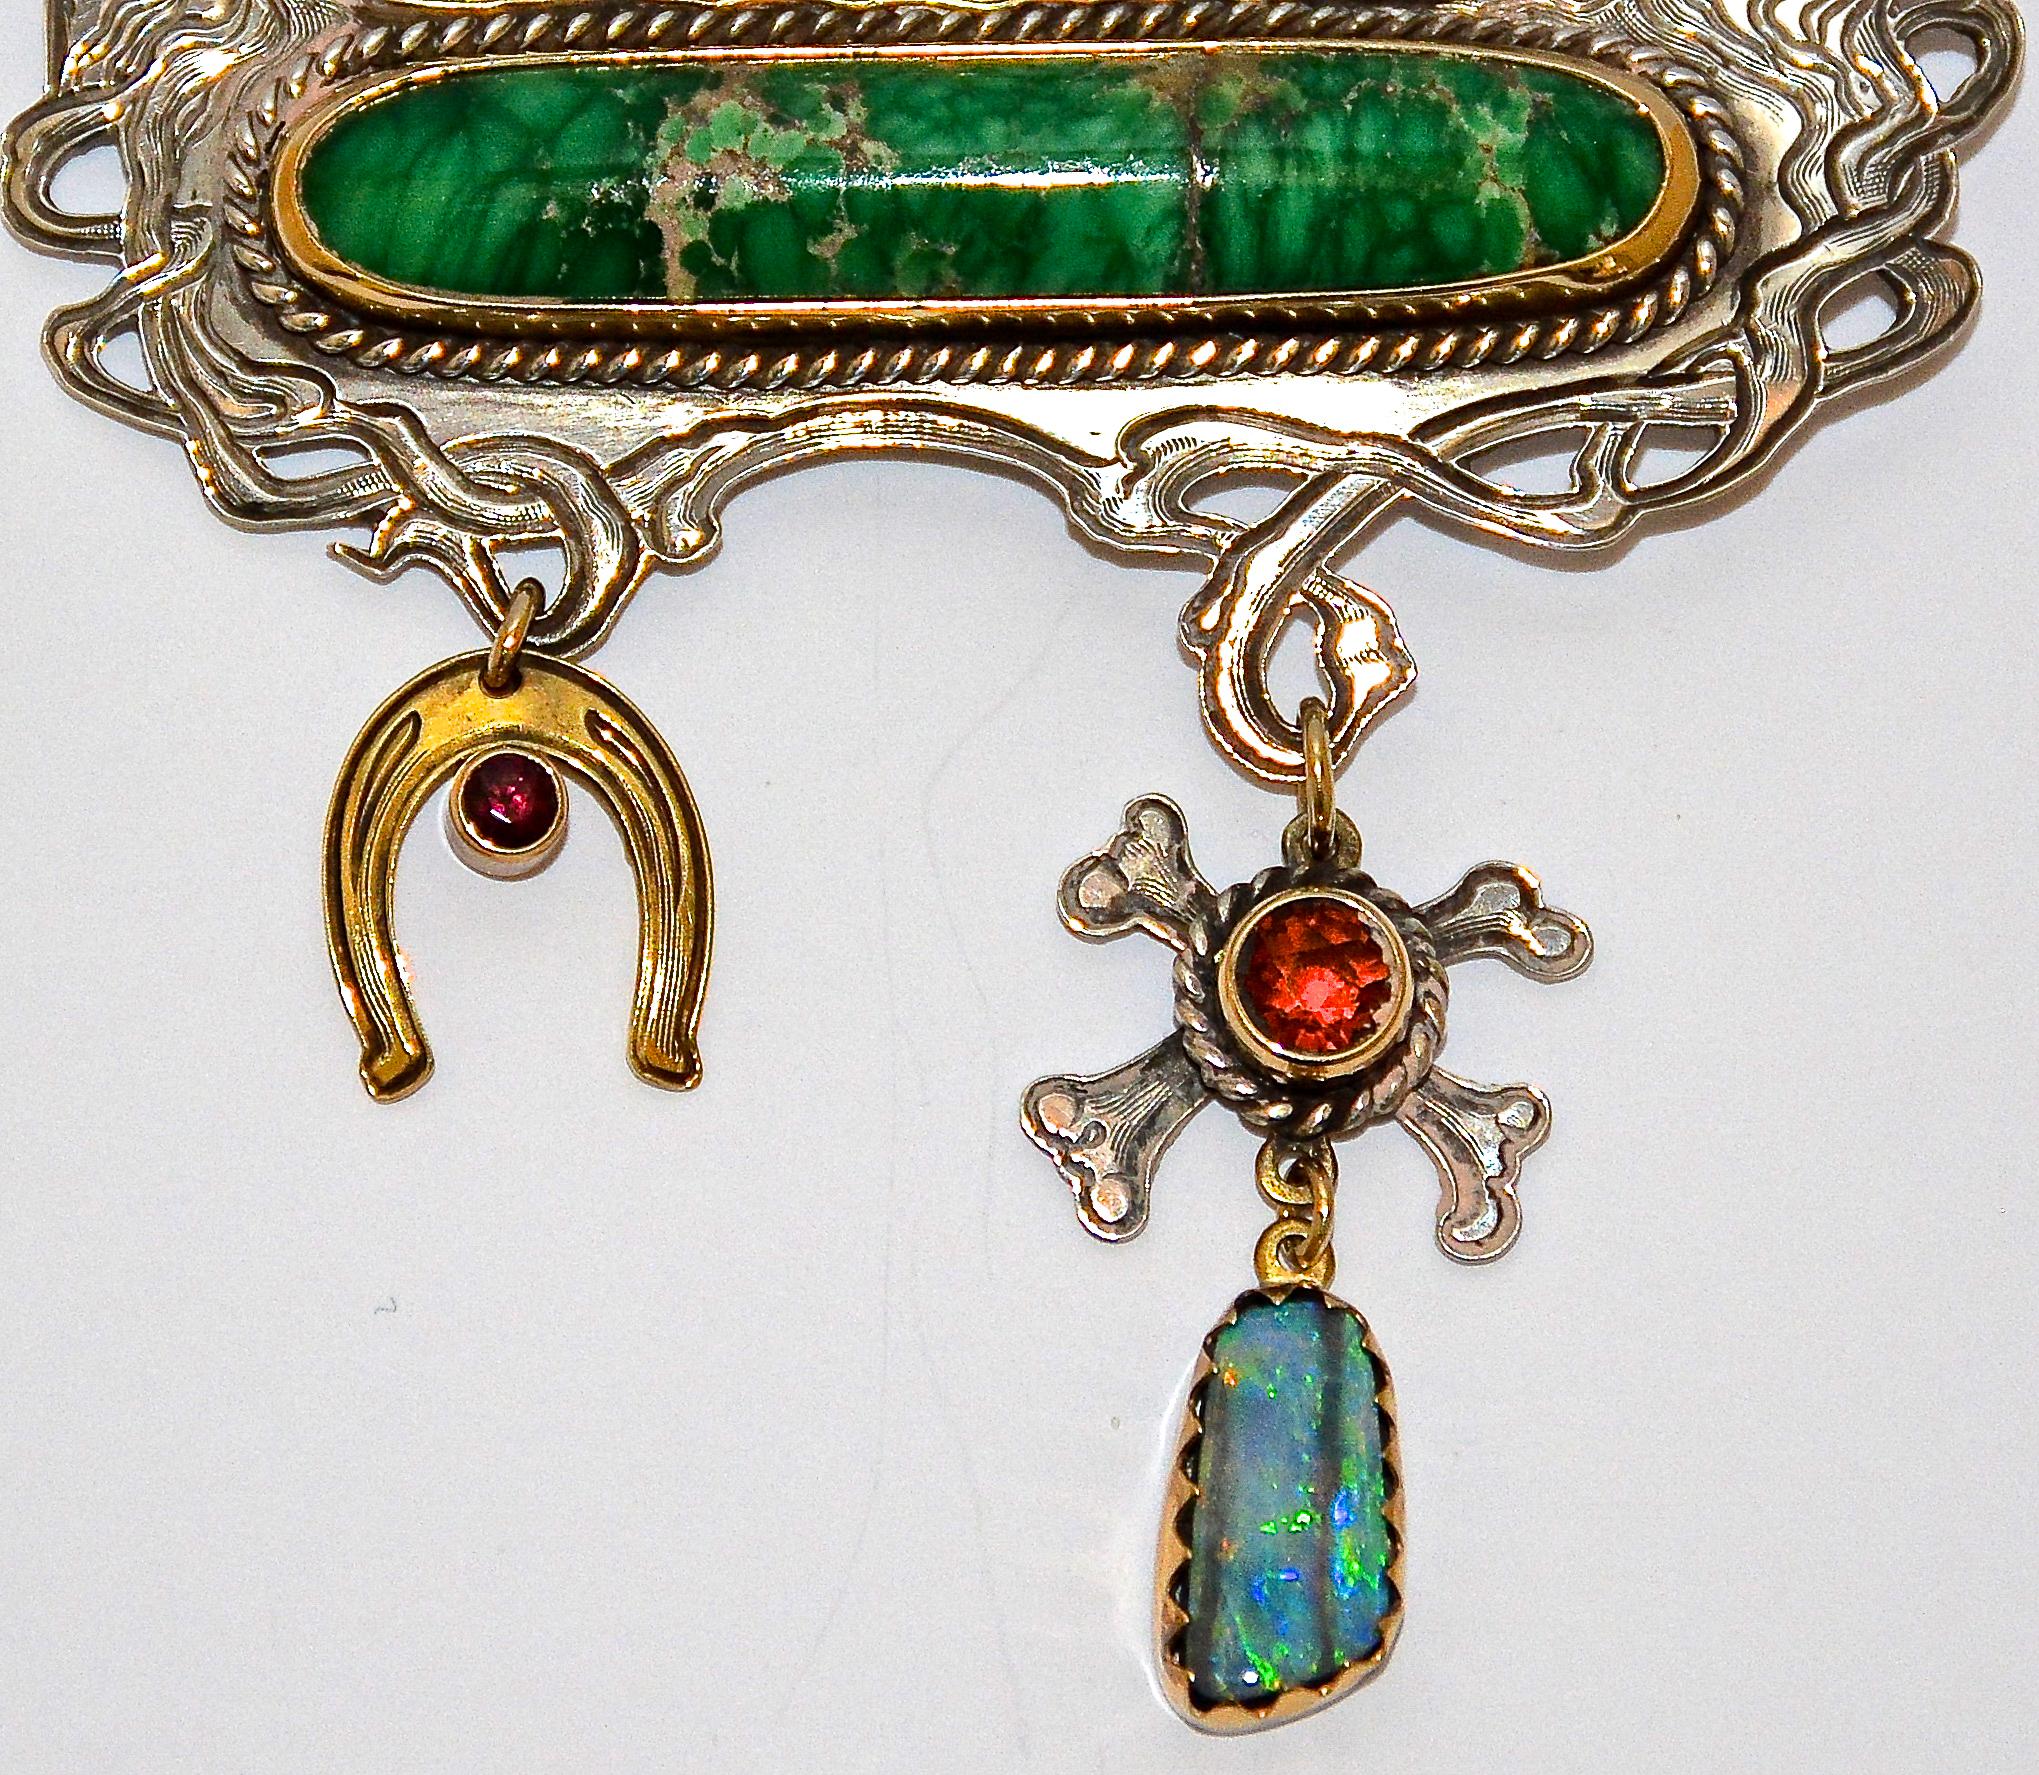 kit carson jewelry for sale